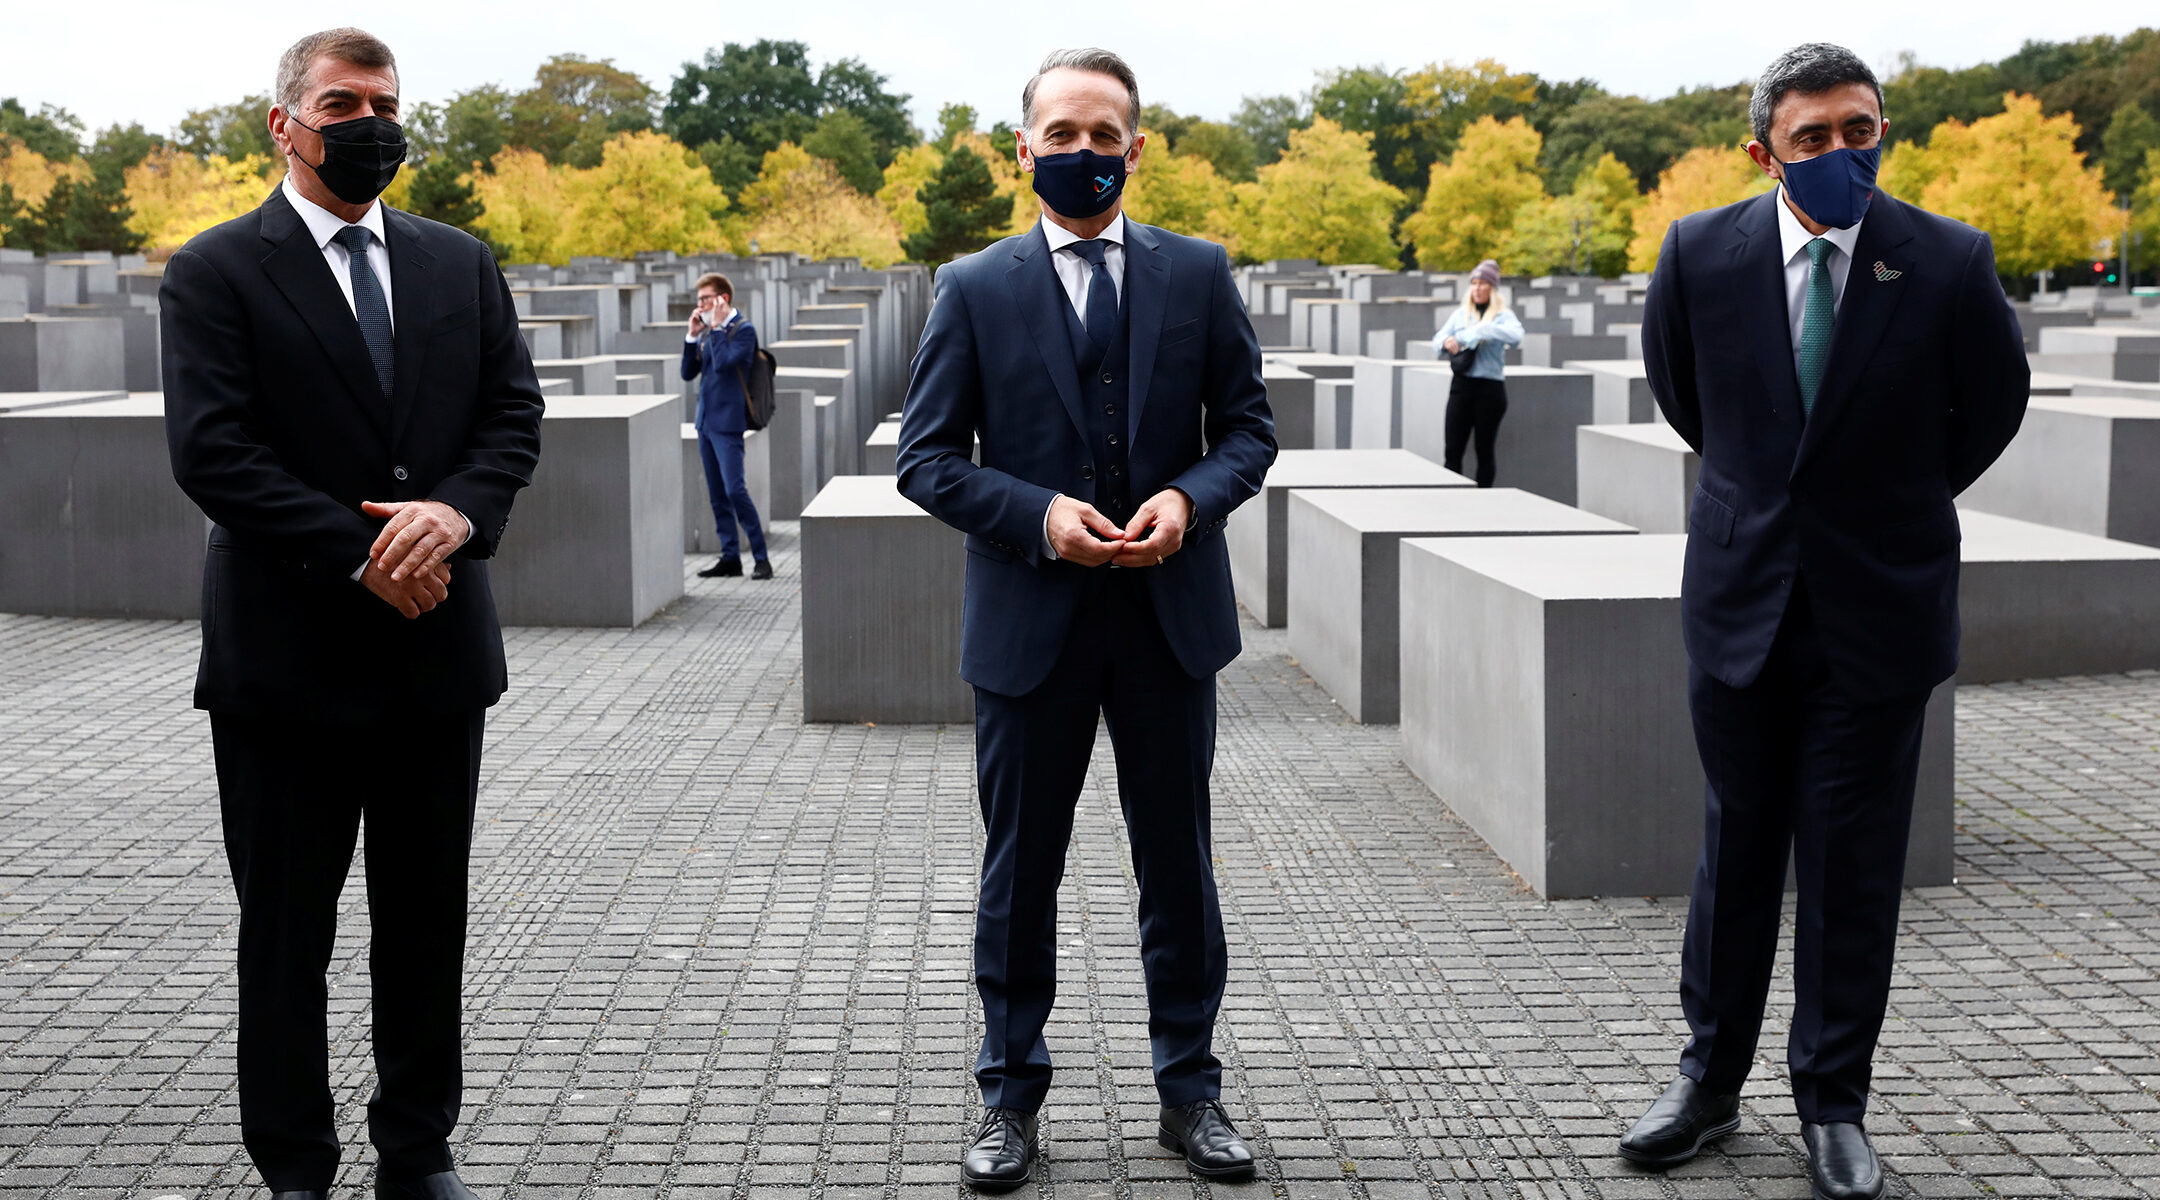 UAE Foreign Minister Abdullah bin Zayed al-Nahyan, right, with German Foreign Minister Heiko Maas and his Israeli counterpart Gabi Ashkenazi in Berlin on October 6, 2020 (Michele Tantussi-Pool/Getty Images)